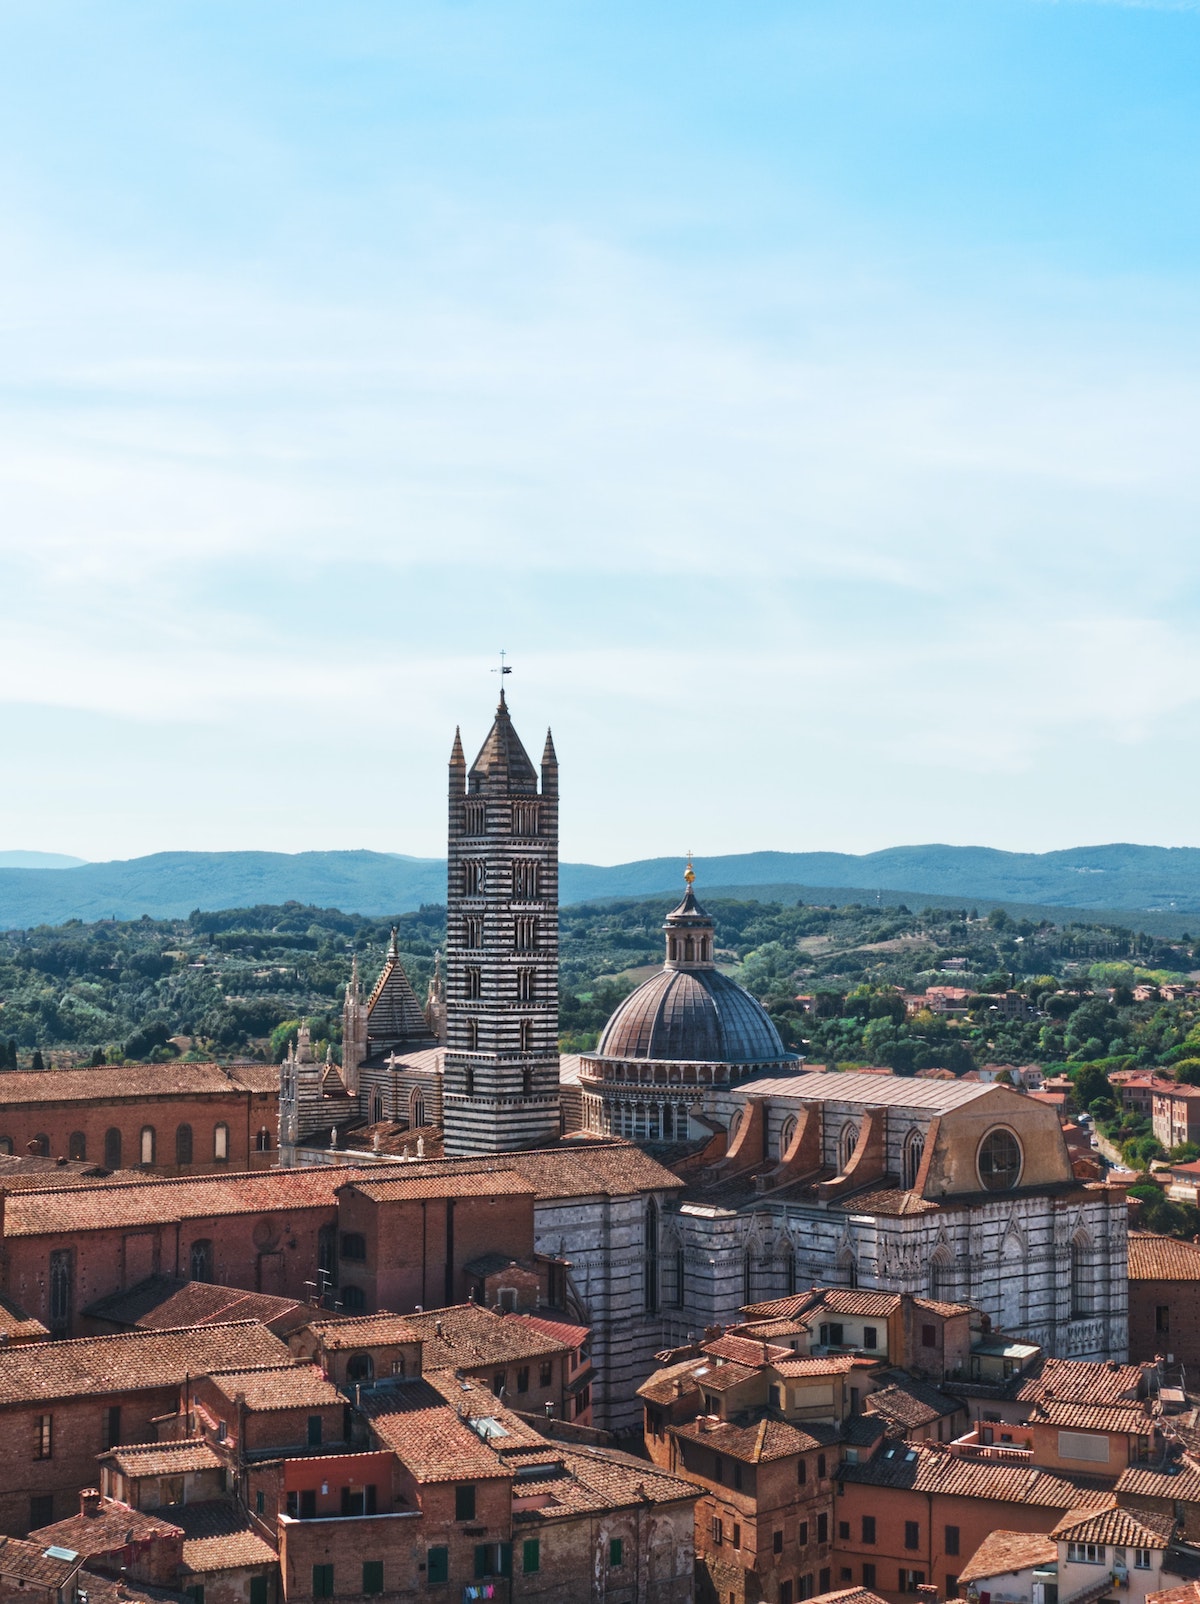 Aerial photo of Siena, Italy, with its cathedral and bell tower prominently featured